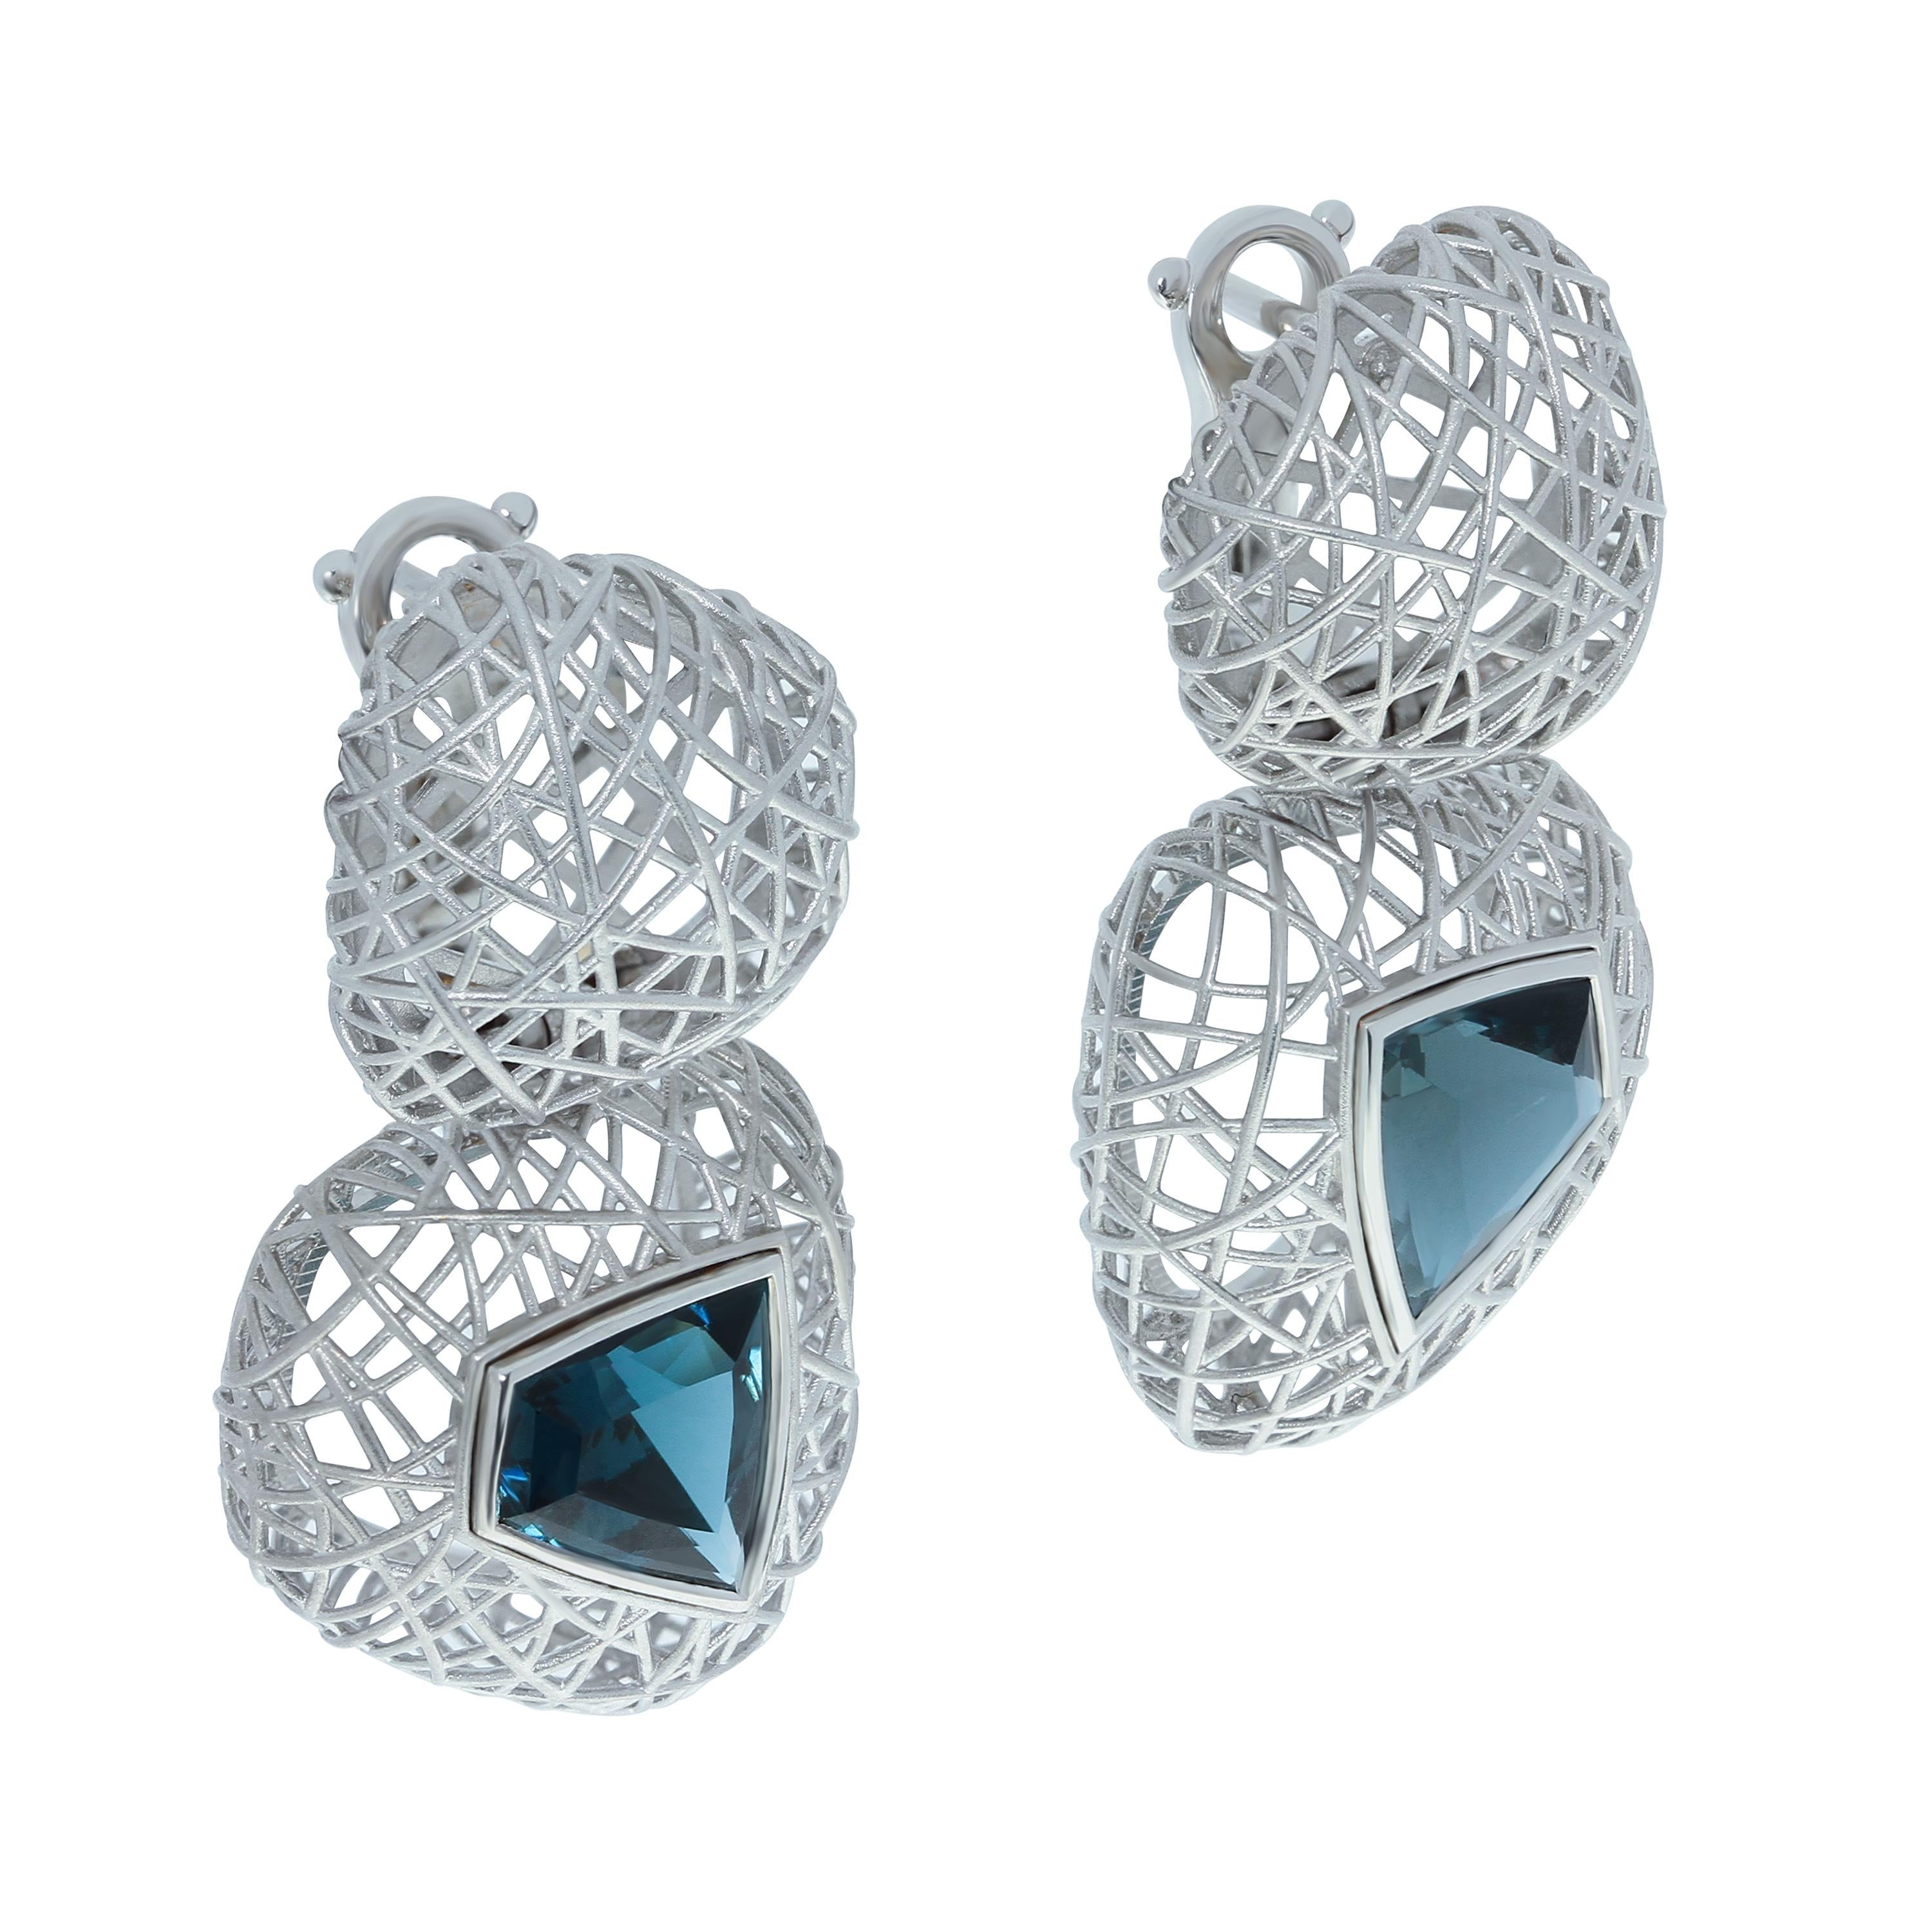 London Topaz 5.05 Carat 18 Karat White Gold Rolling Stone Earrings
We all know about Western films, where rolling stones are moving all the time in the desert. Our collection is inspired by this amazing plant. Thin 